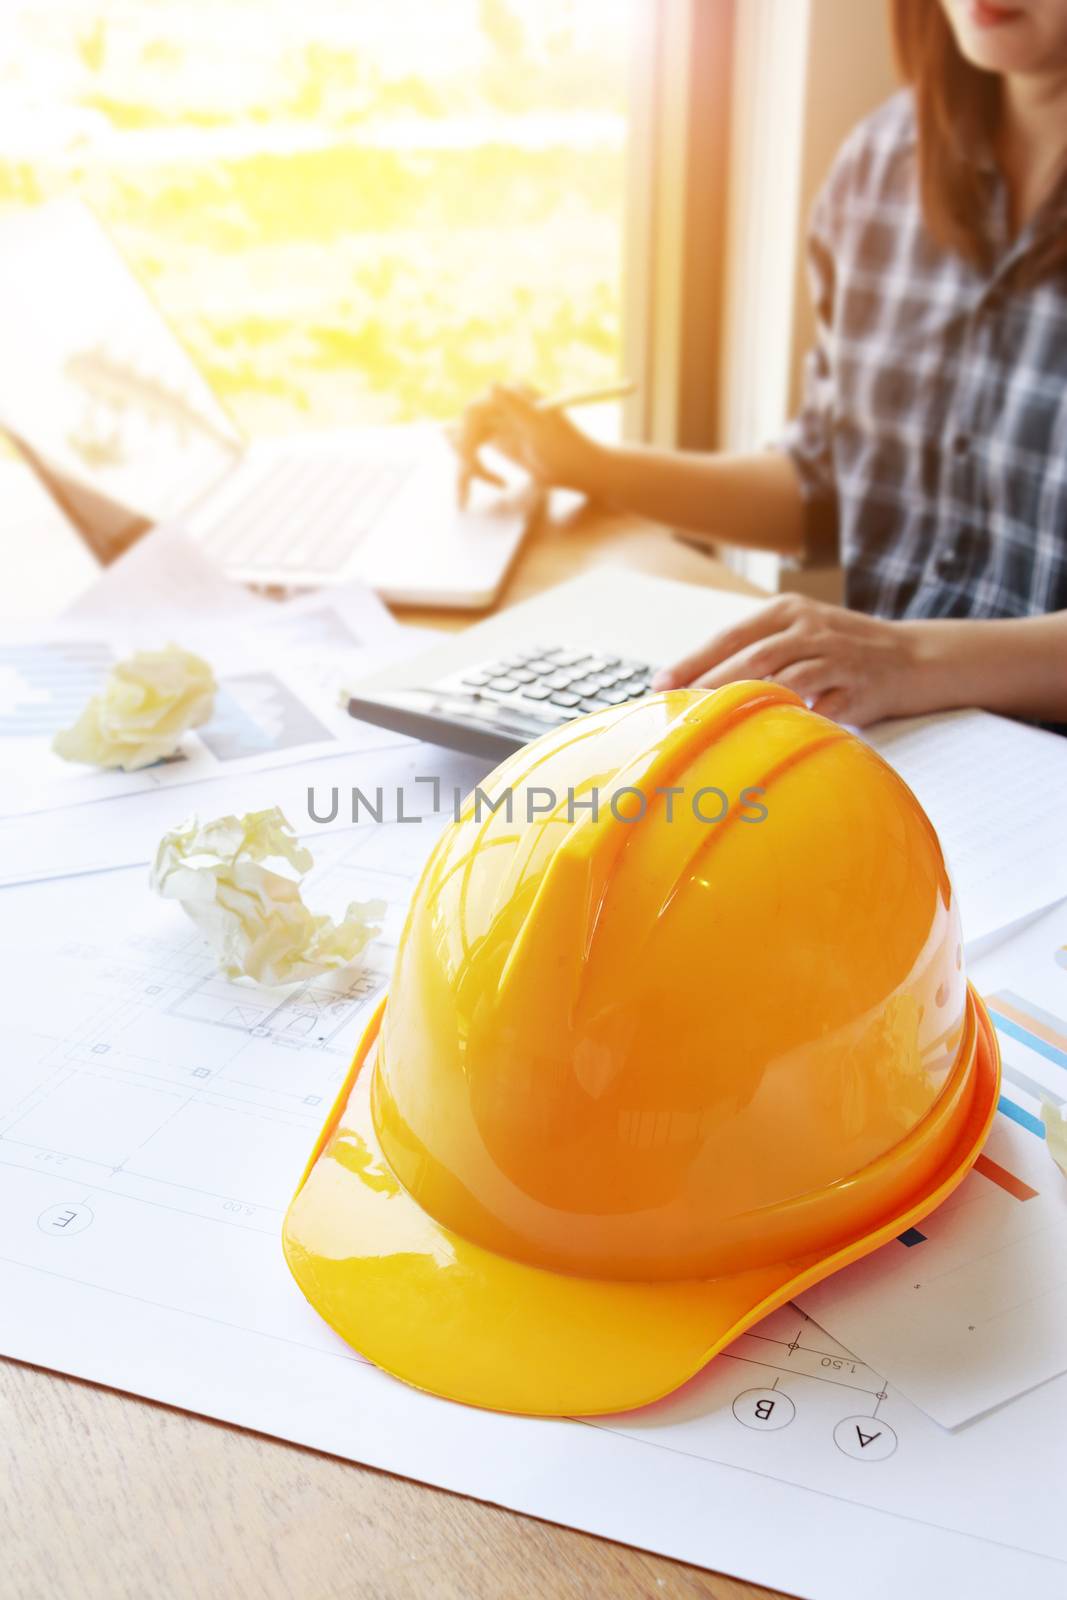 architect Asian woman working with laptop, calculator and blueprints. engineer calculate and inspection in workplace for blueprints architectural plan,sketching a construction project ,selective focus by asiandelight